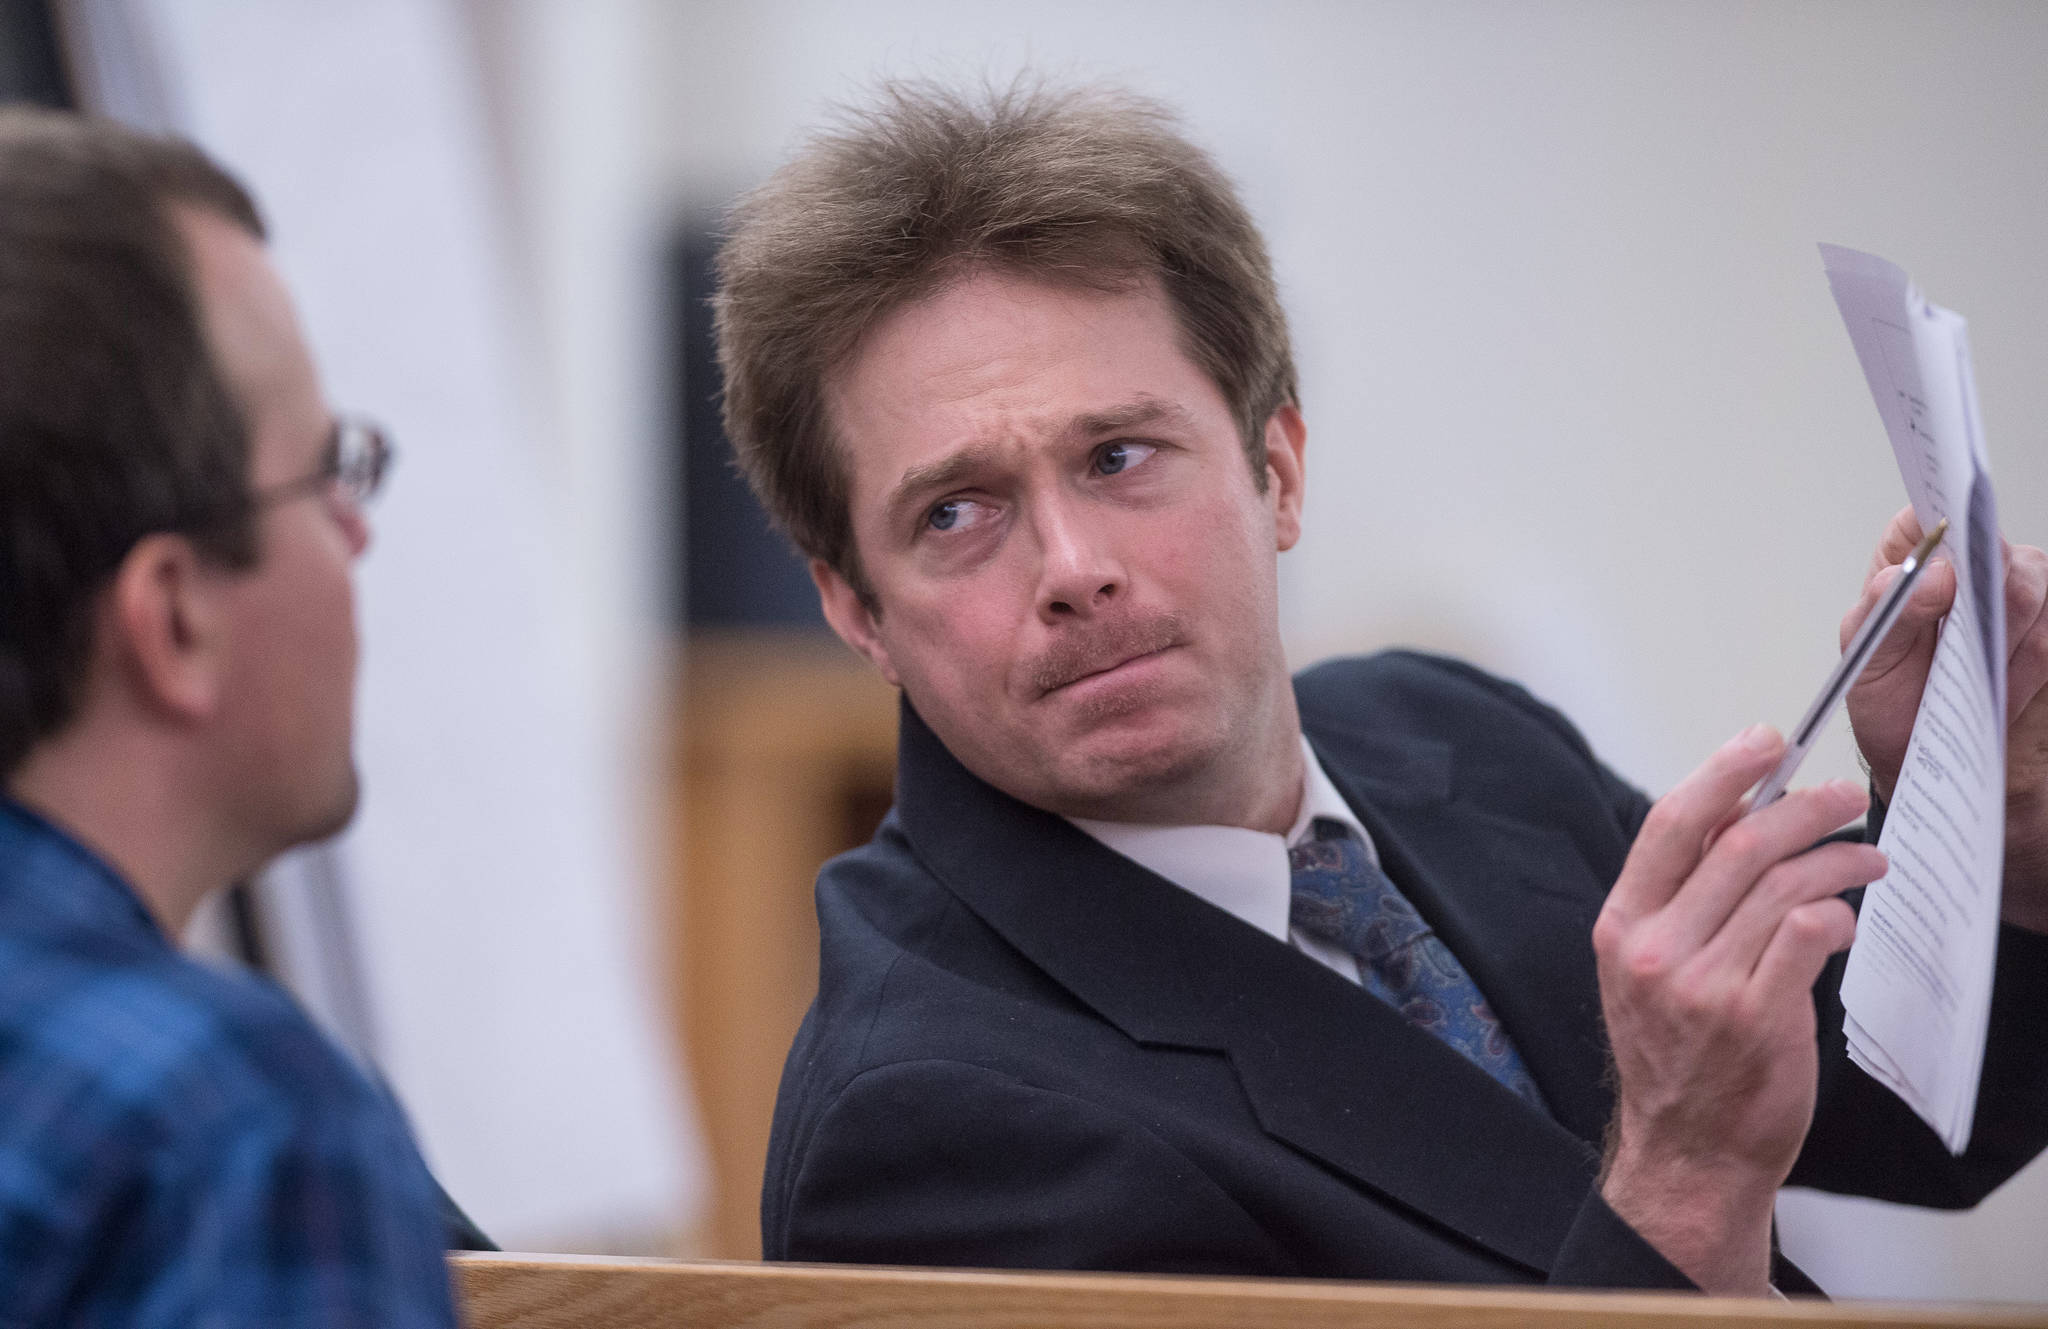 Christopher Strawn, right, confers with criminal defense attorney Nicholas Polasky during his trial in Juneau Superior Court on Friday, Oct. 13, 2017. Strawn, 34, faces charges of first-degree and second-degree murder, manslaughter, criminally negligent homicide, third-degree assault and weapons misconduct in the shooting death of Brandon Cook in October 2015. (Michael Penn | Juneau Empire)